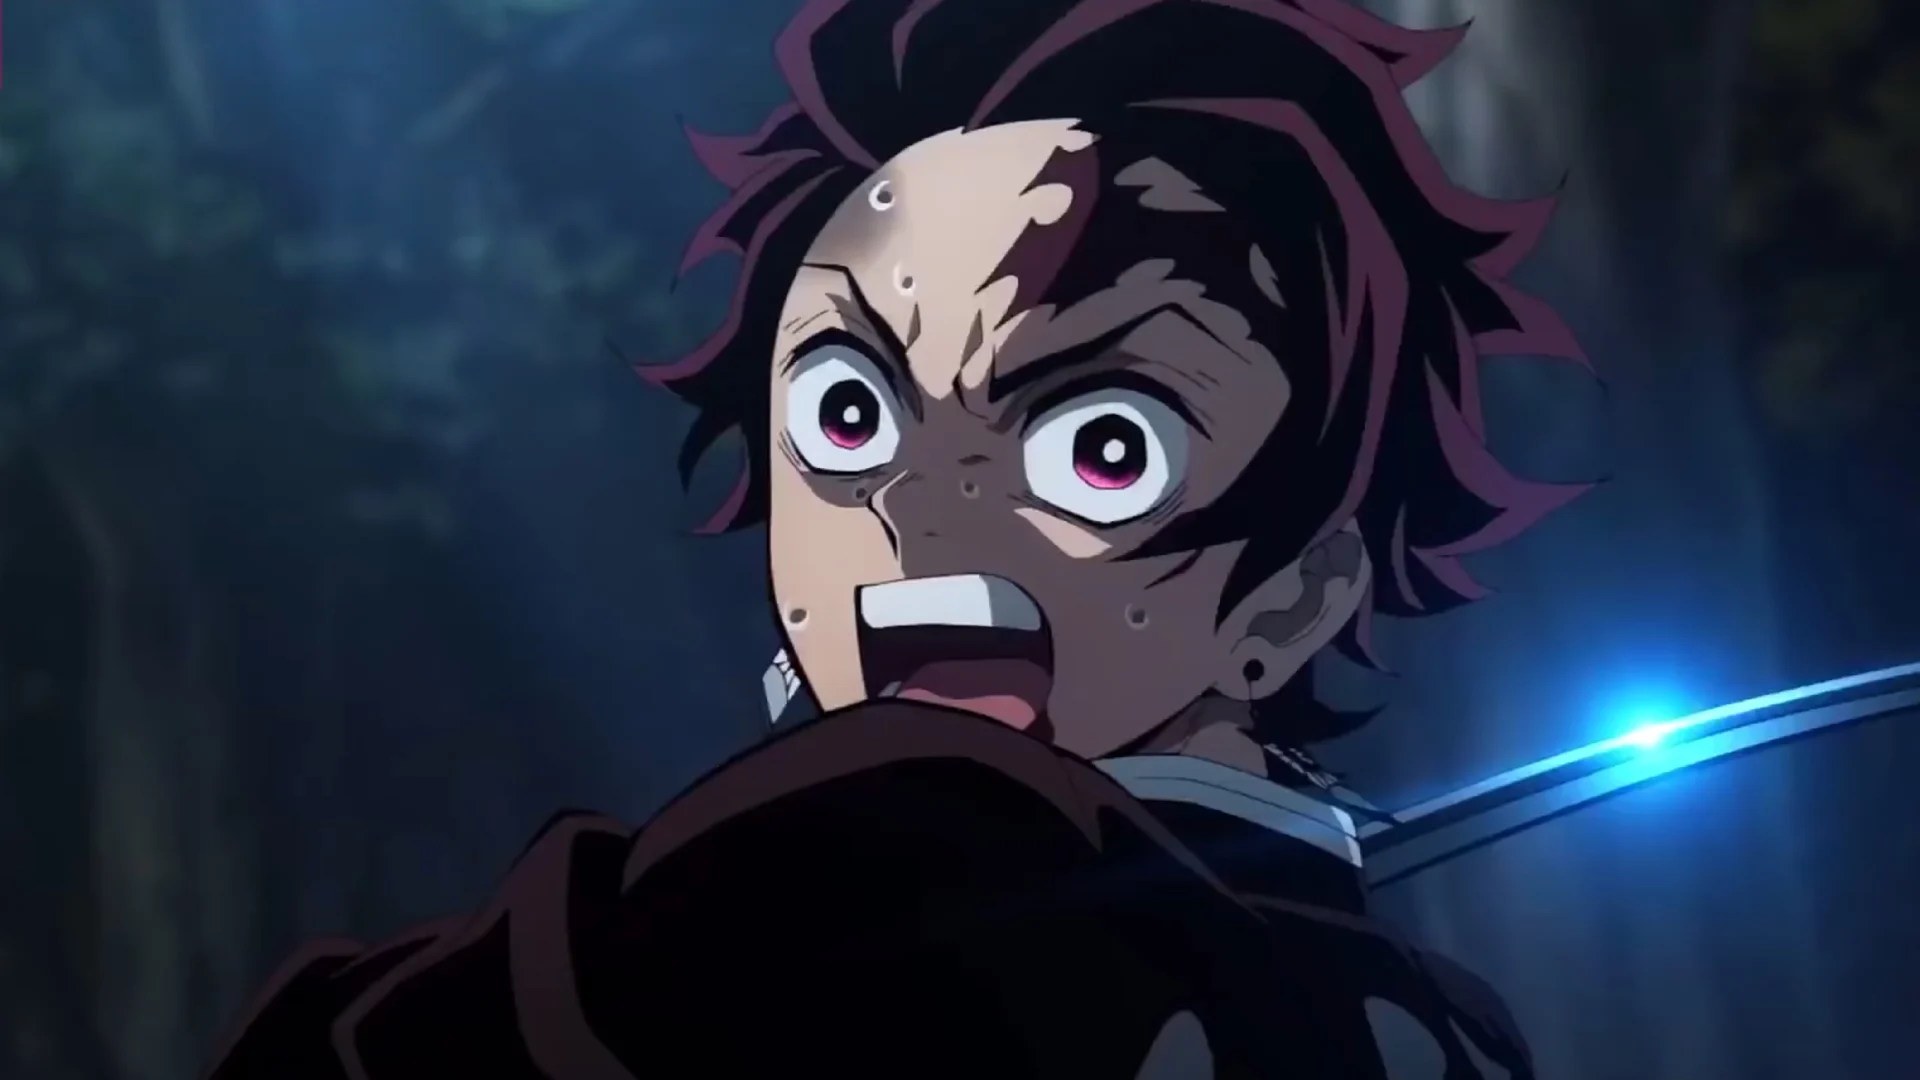 Rumour Suggests Demon Slayer Season 3 Finale Will Be Longer Than Usual